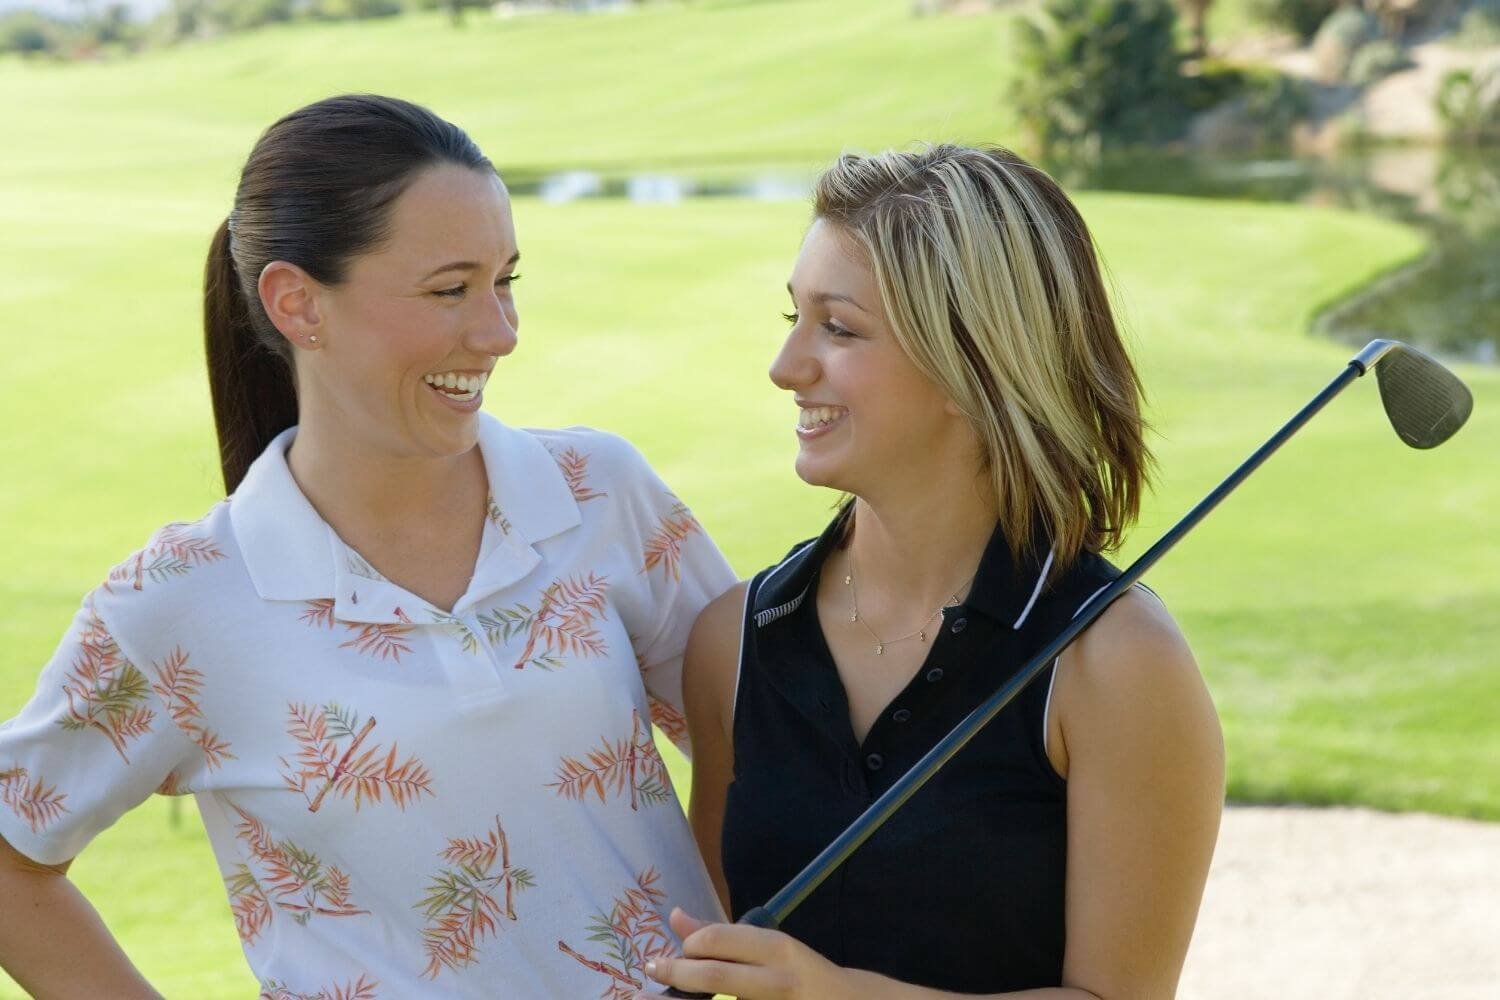 Two female golfers laughing on the golf course